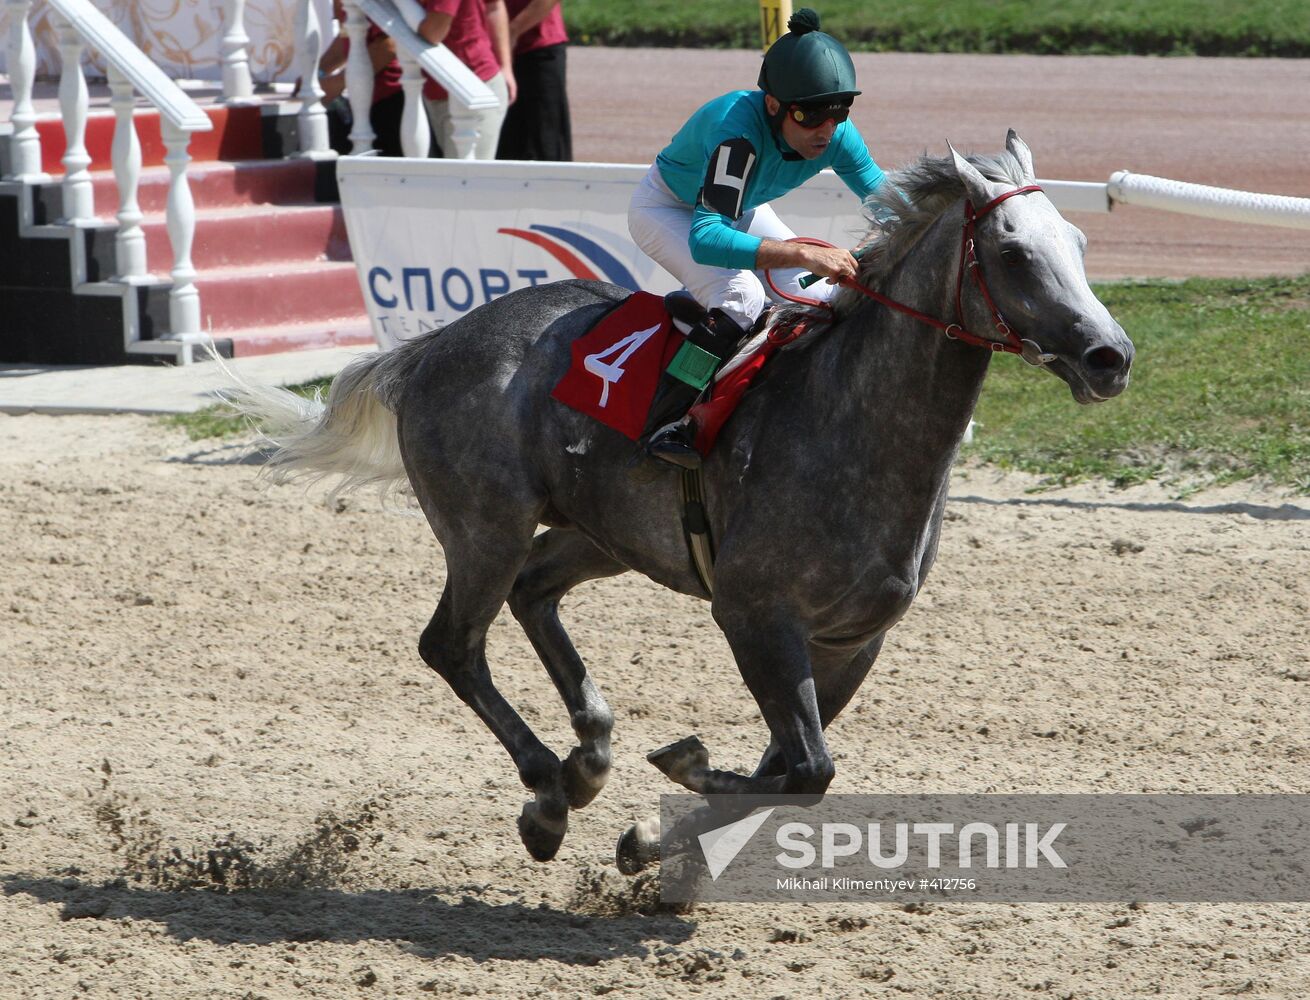 Presidential Horserace in Moscow